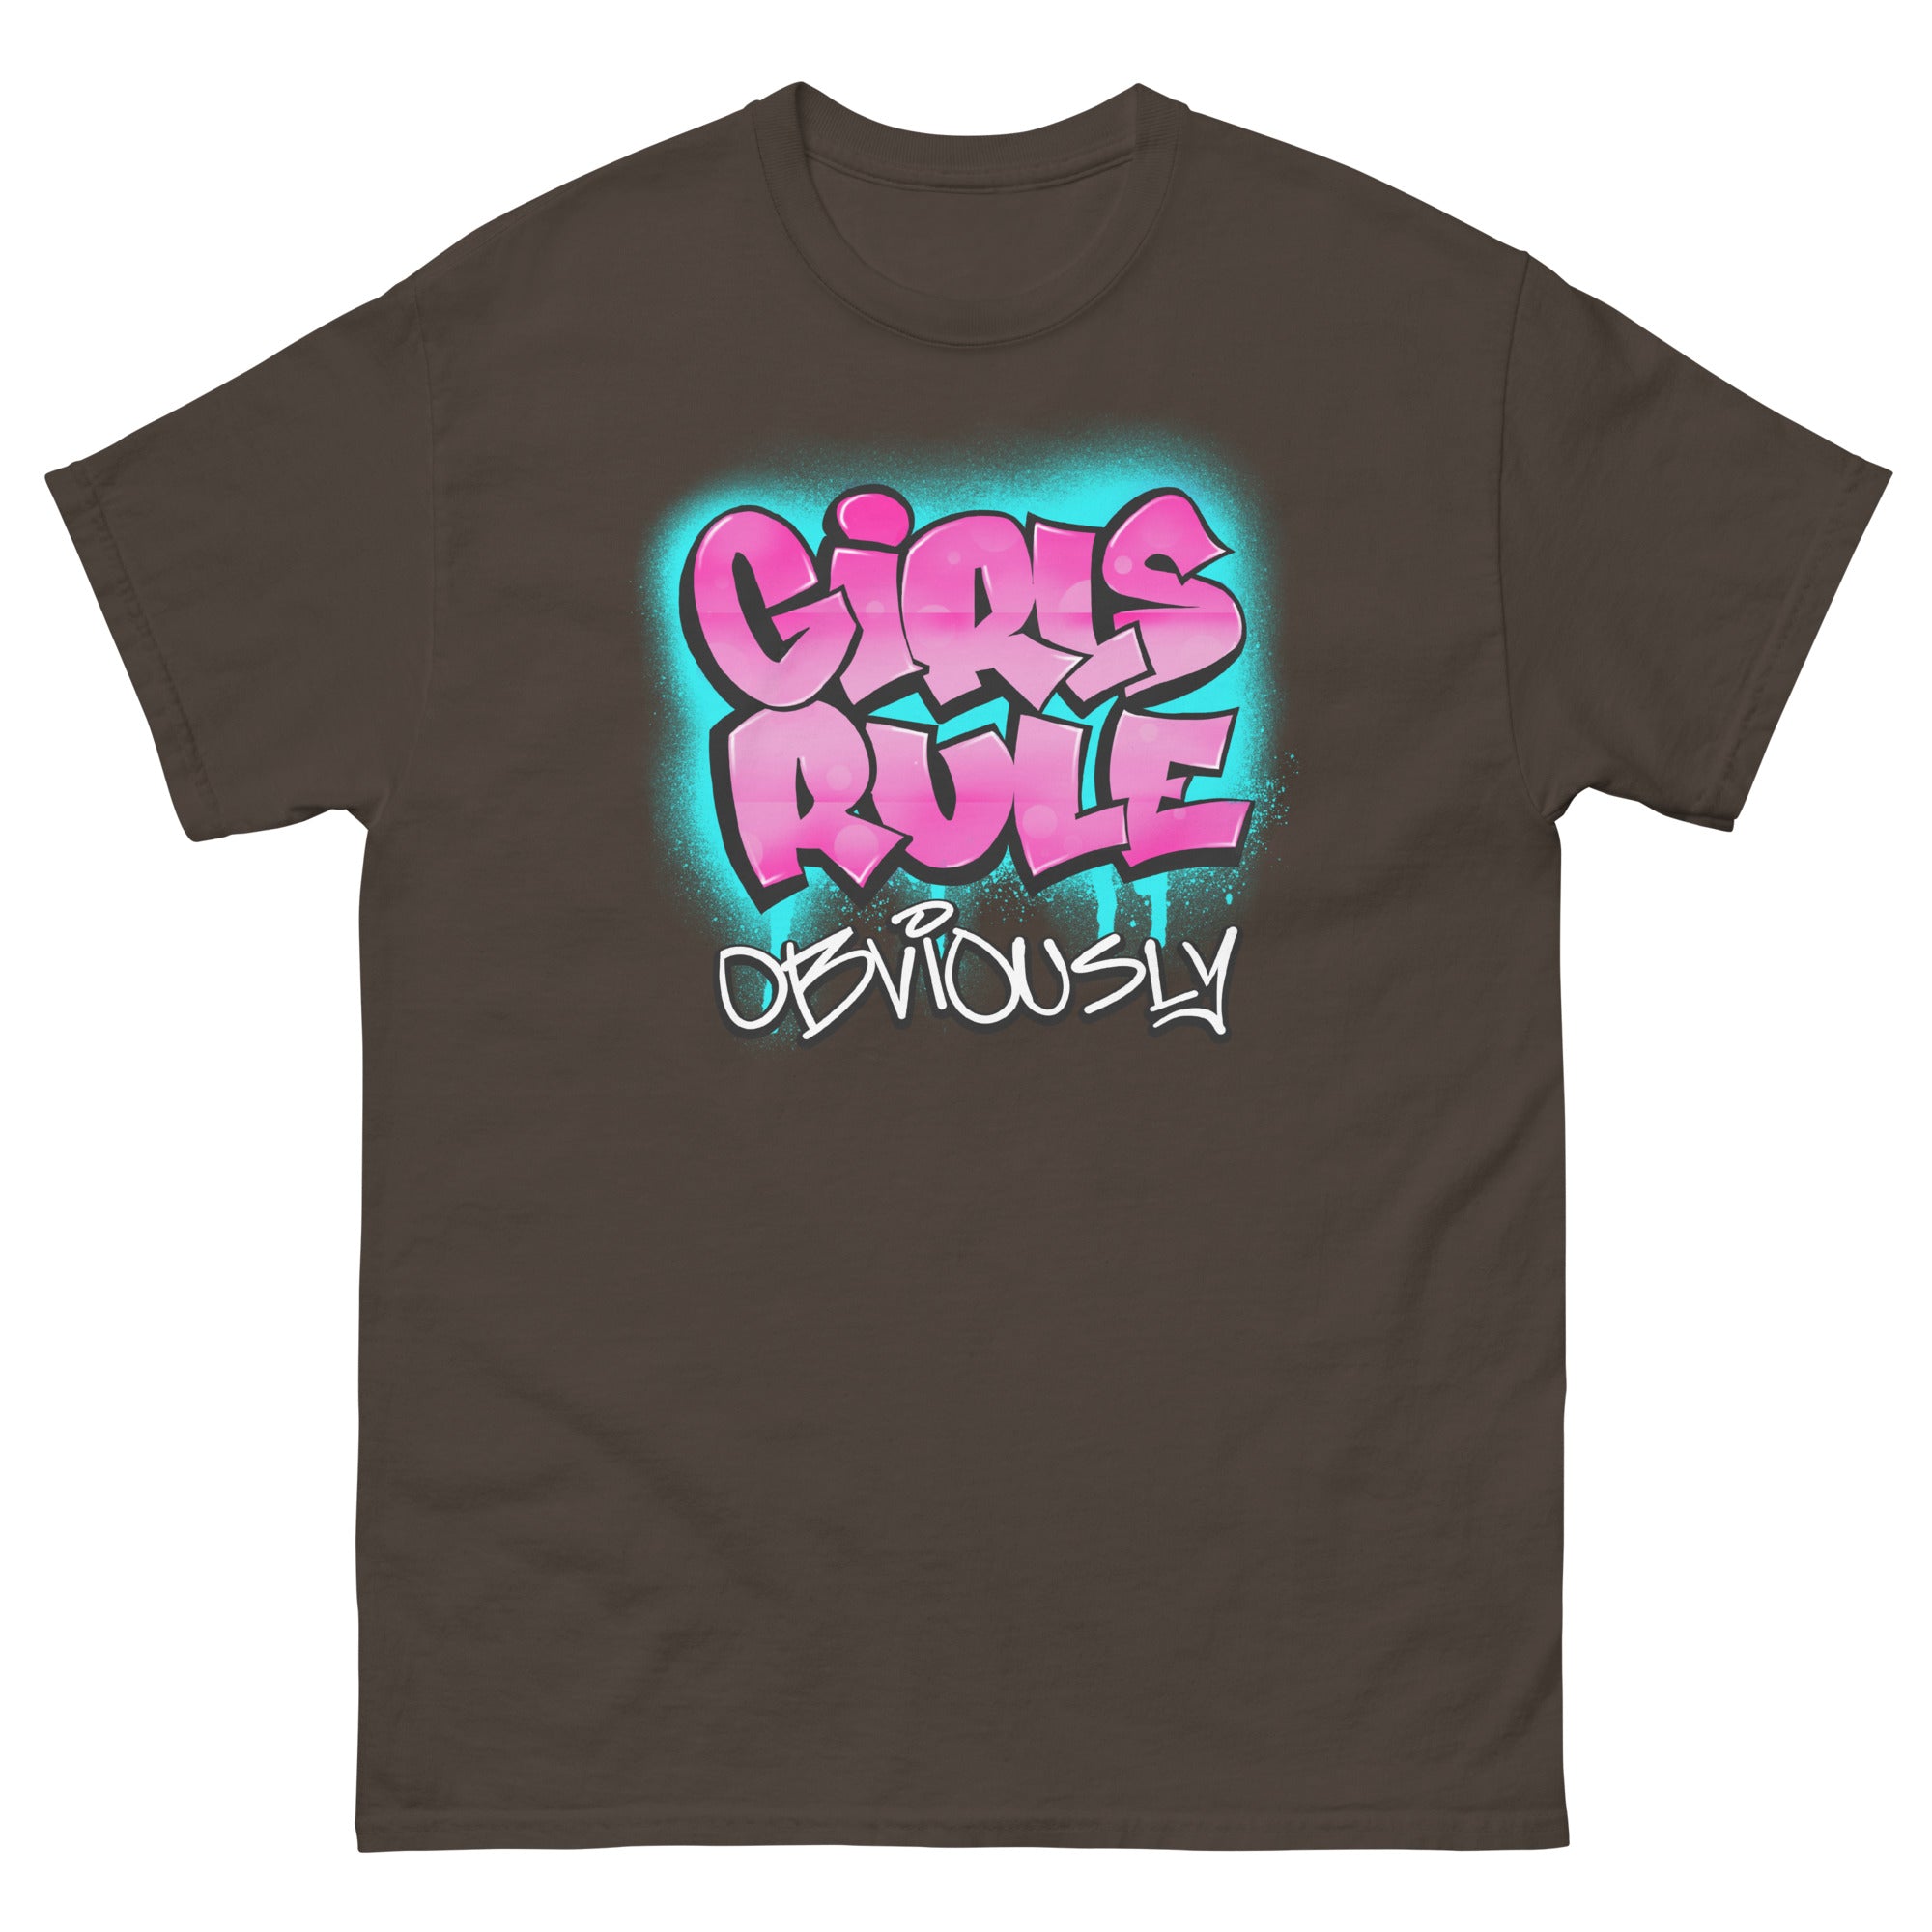 Girls Rule Obviously - Men's Classic T-Shirt